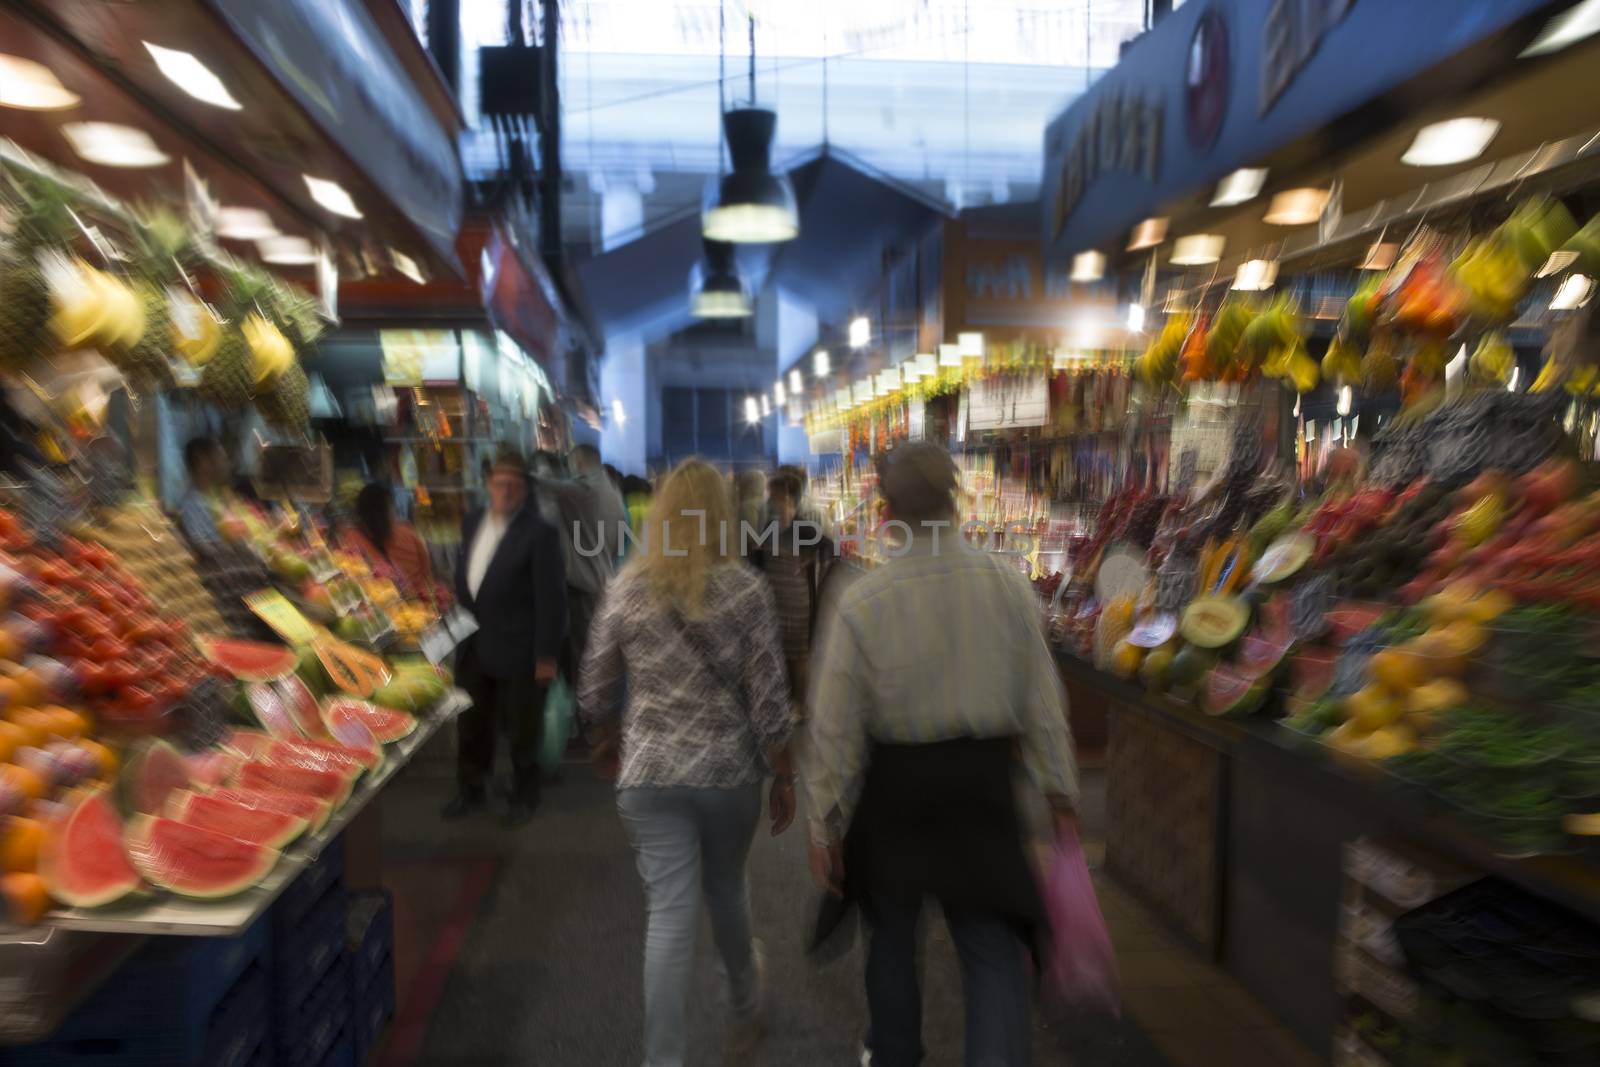 blurry image of fruit and vegetables  in the market by JPC-PROD